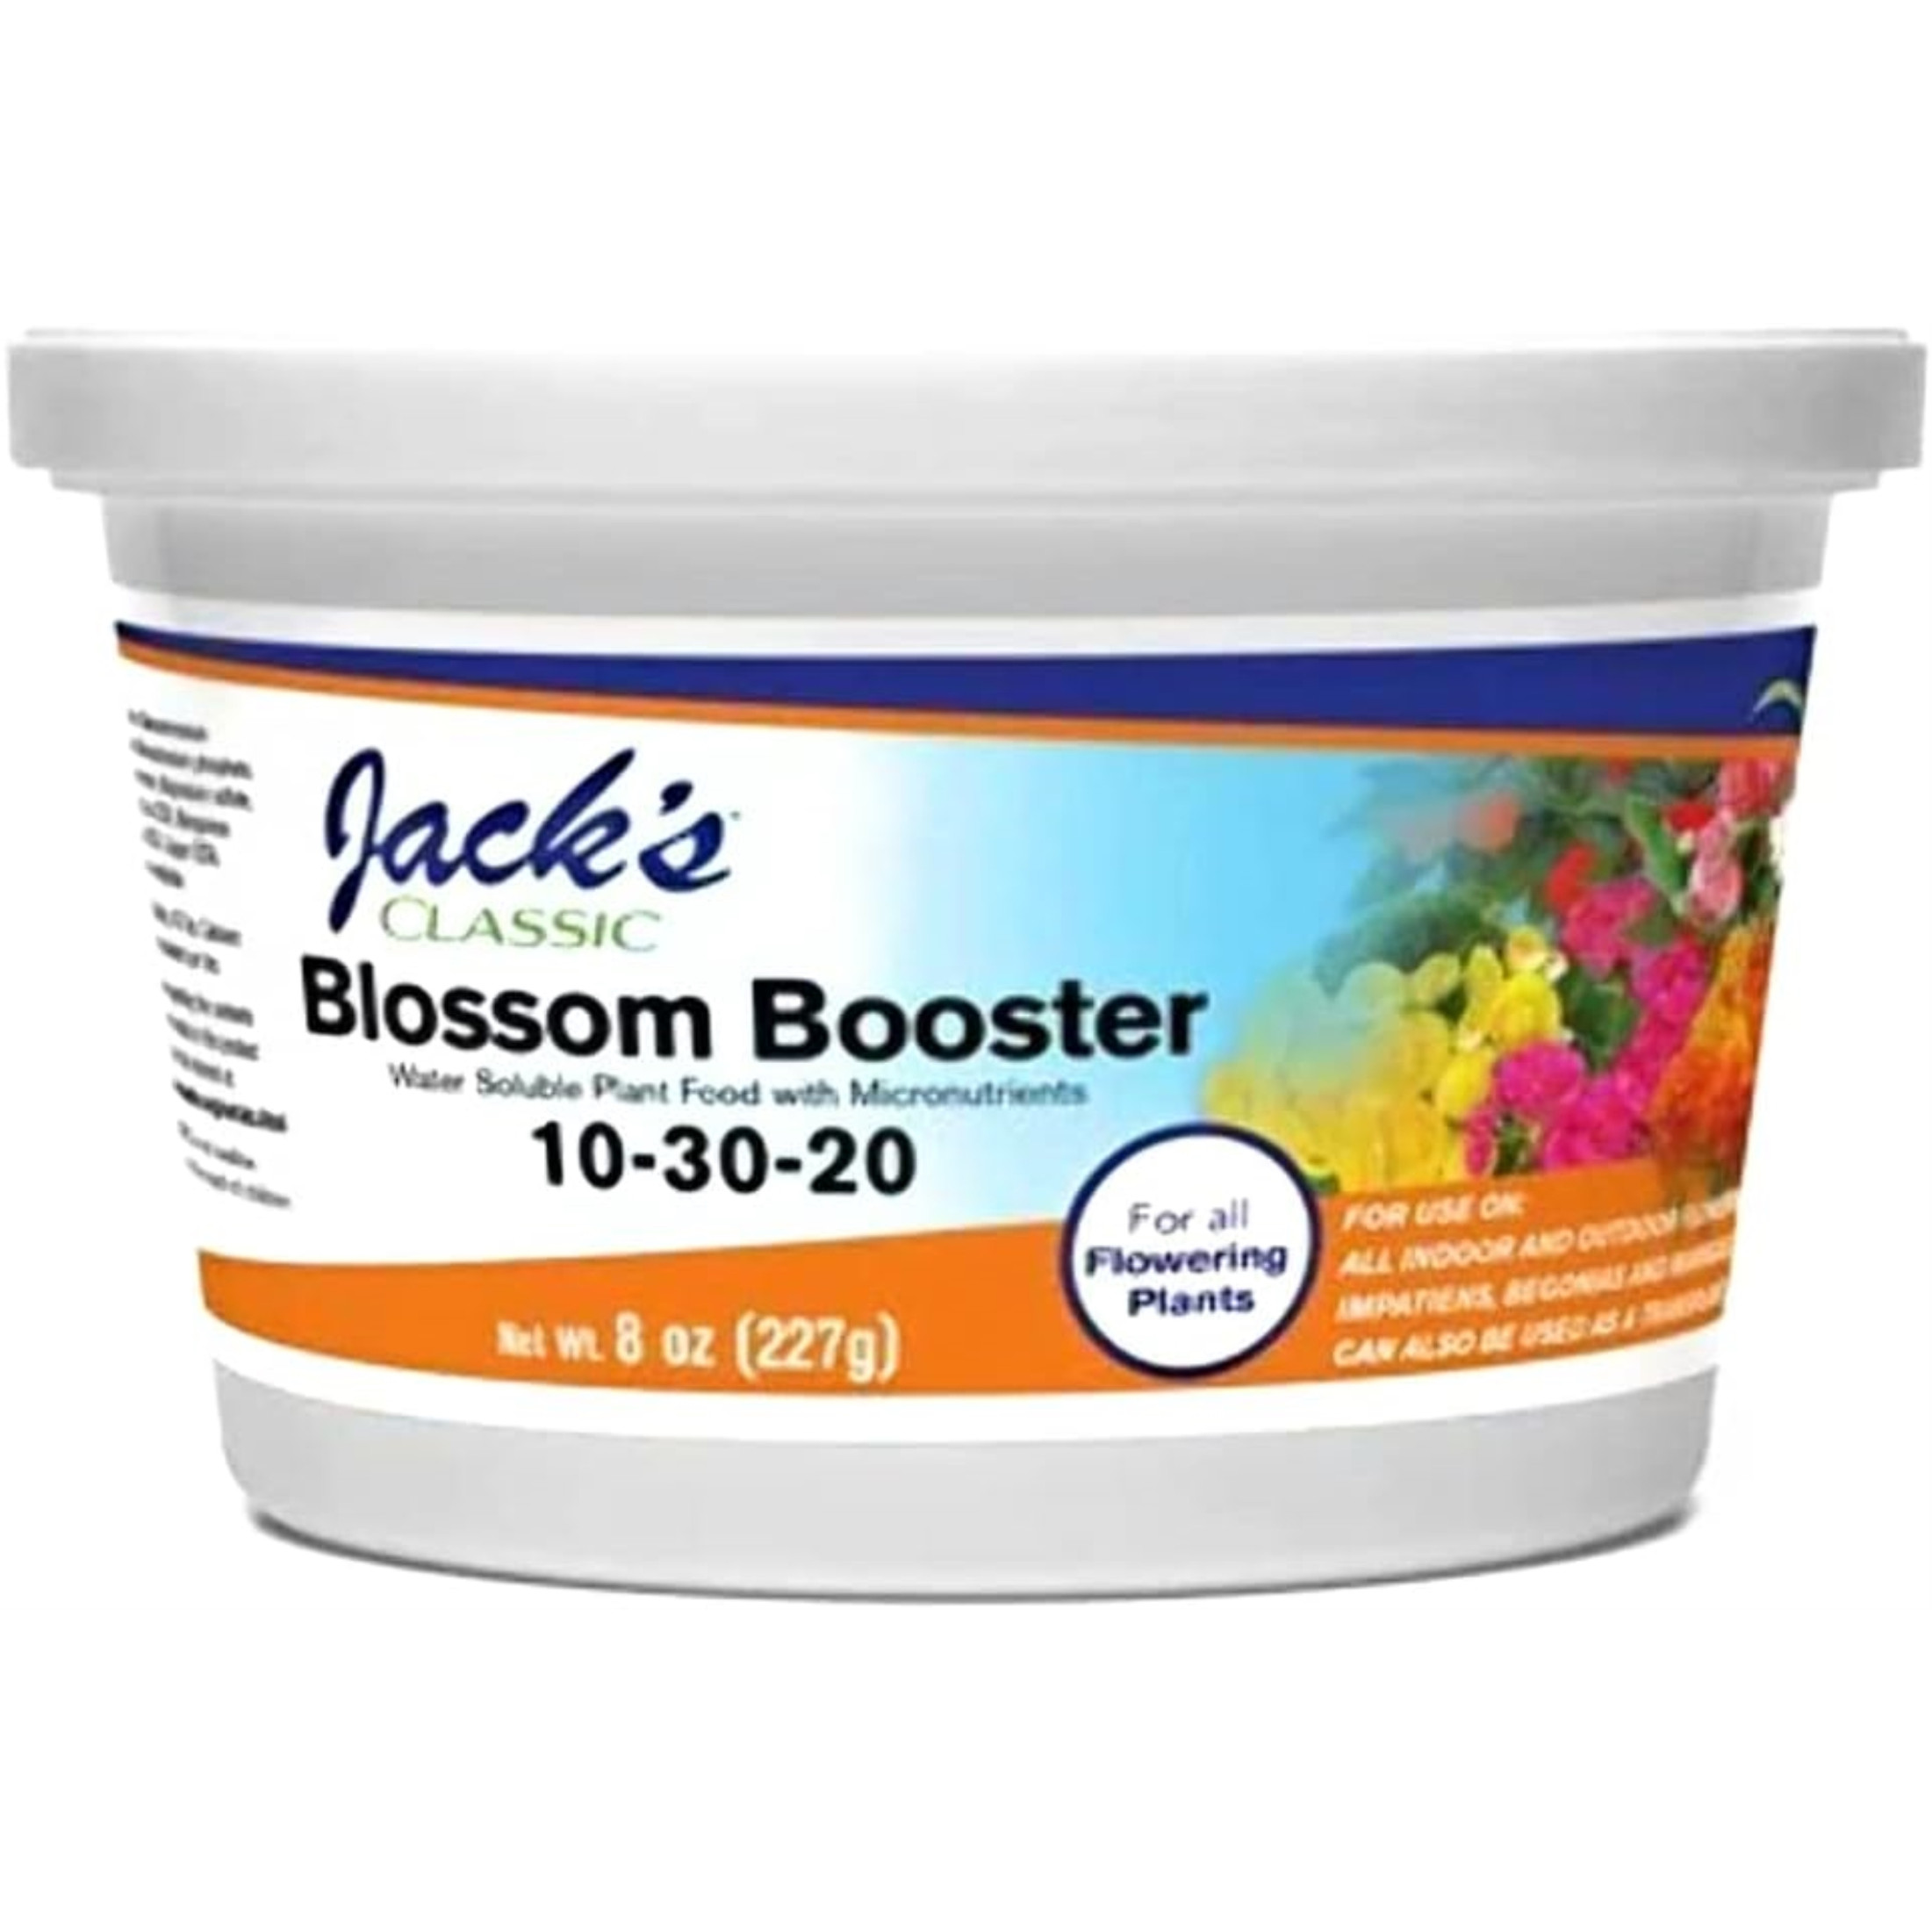 Jack's Classic Blossom Booster Water Soluble Plant Food, 8 oz